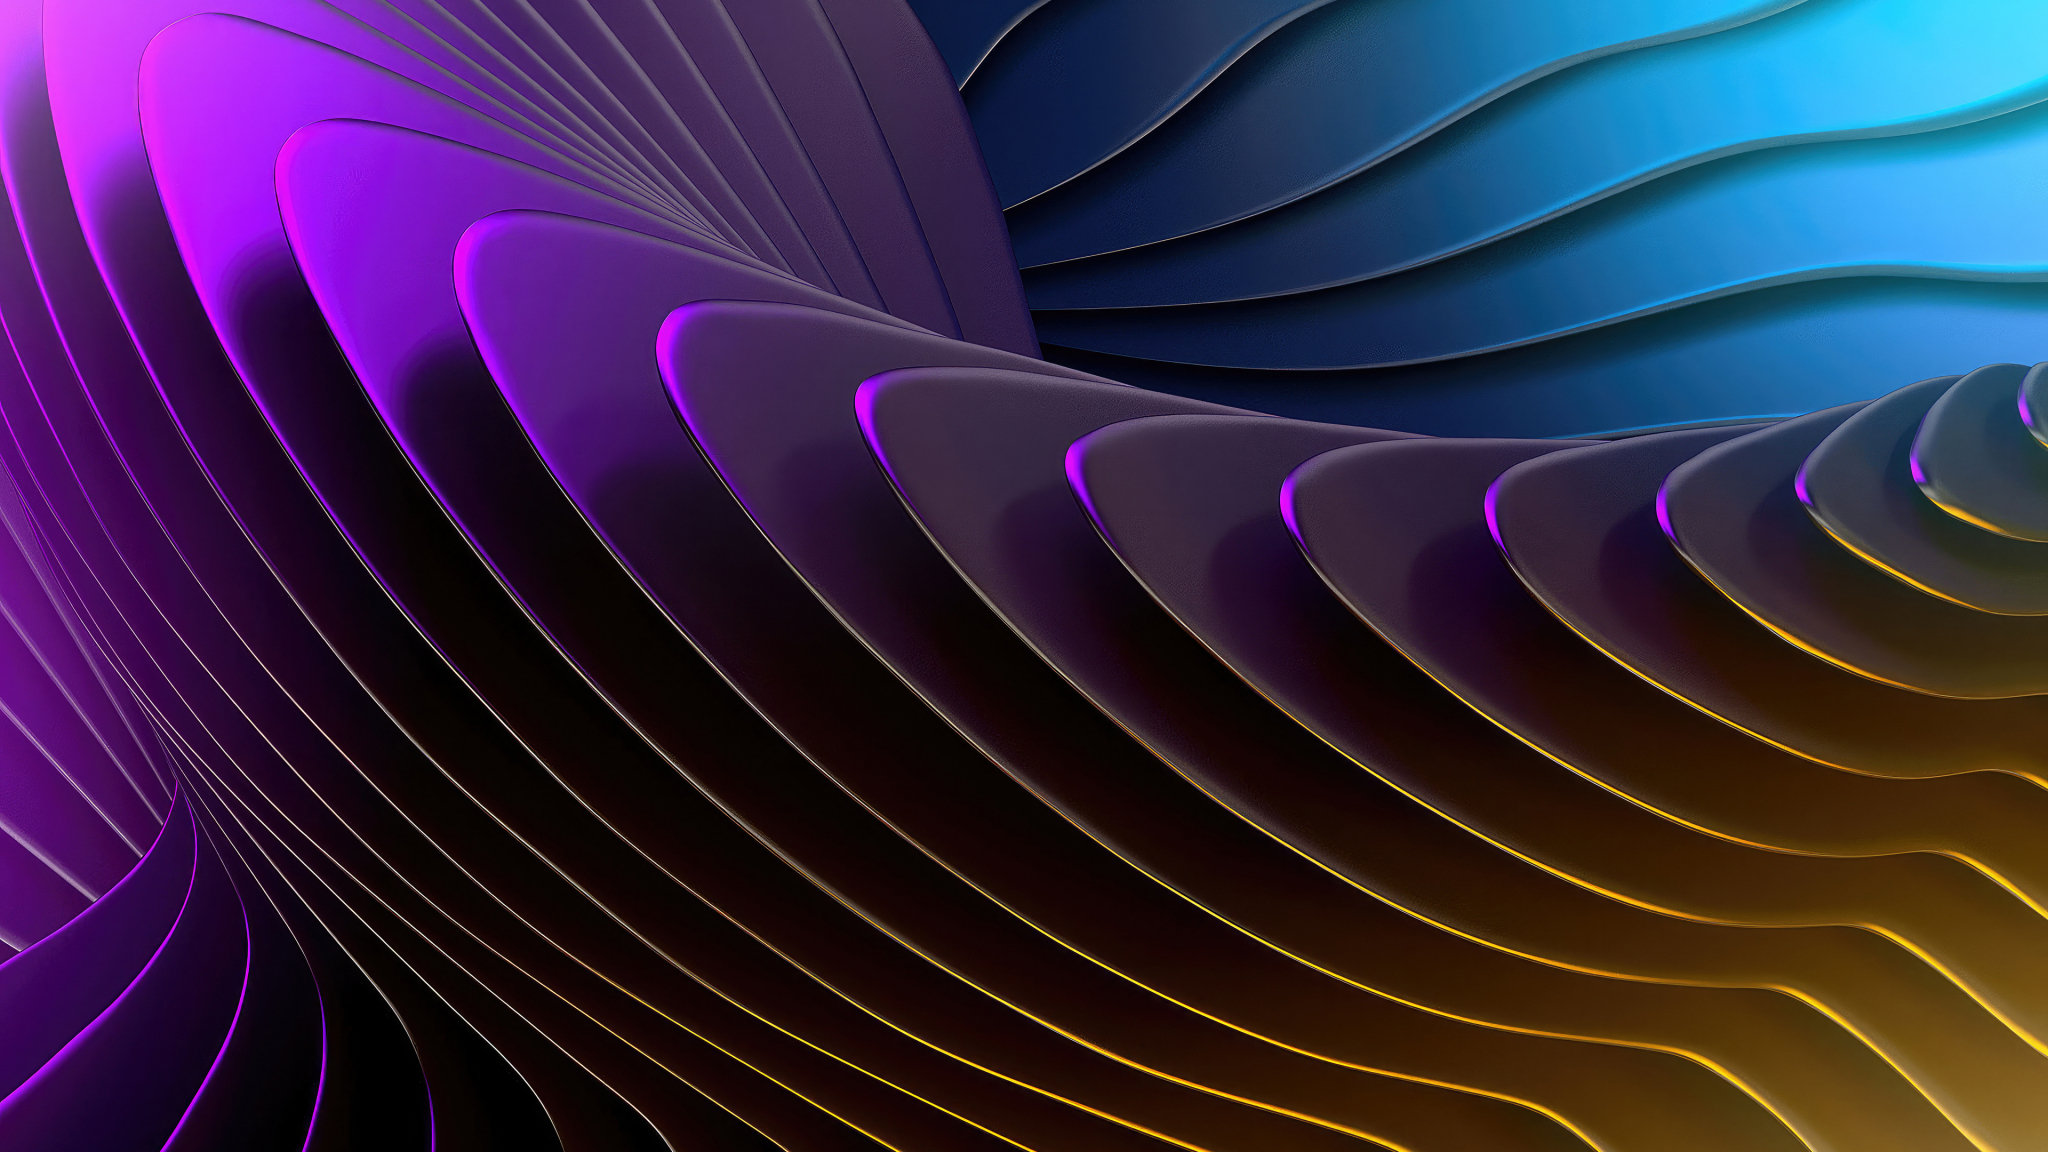 Layers like patterns, abstract, 2048x1152 wallpaper